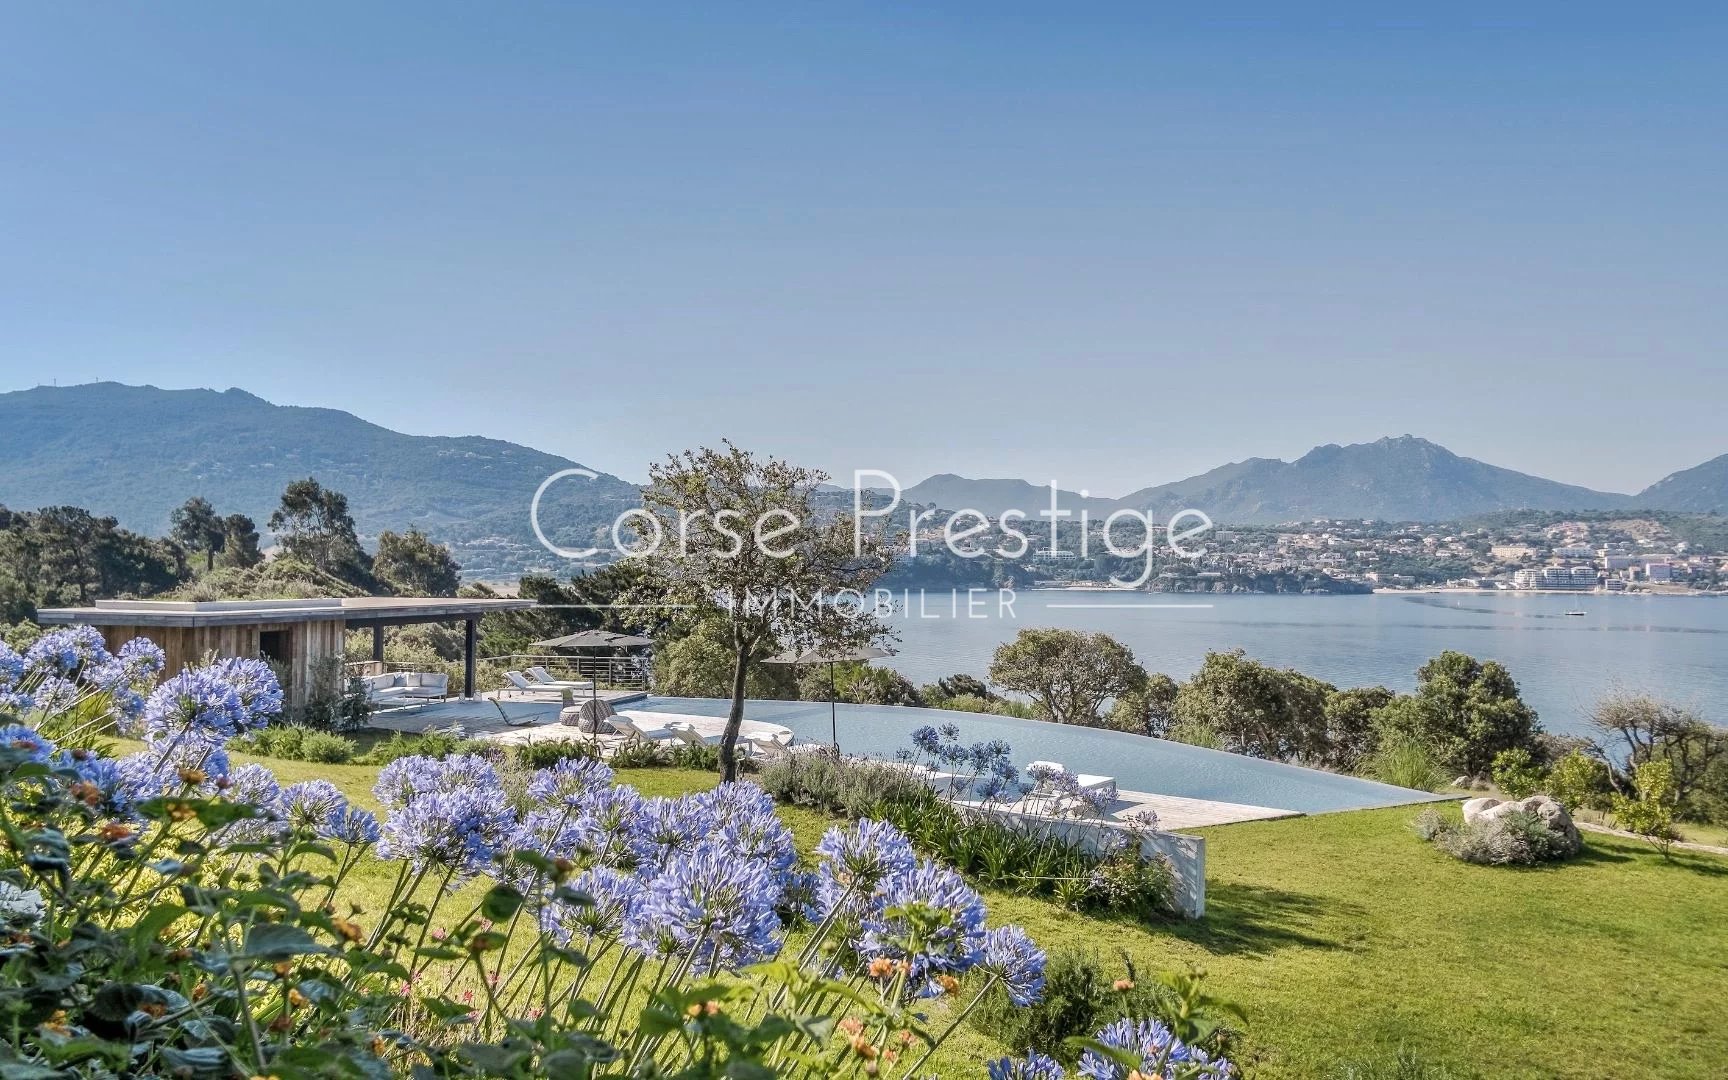 waterfront luxury villa for rent in corsica - propriano image2